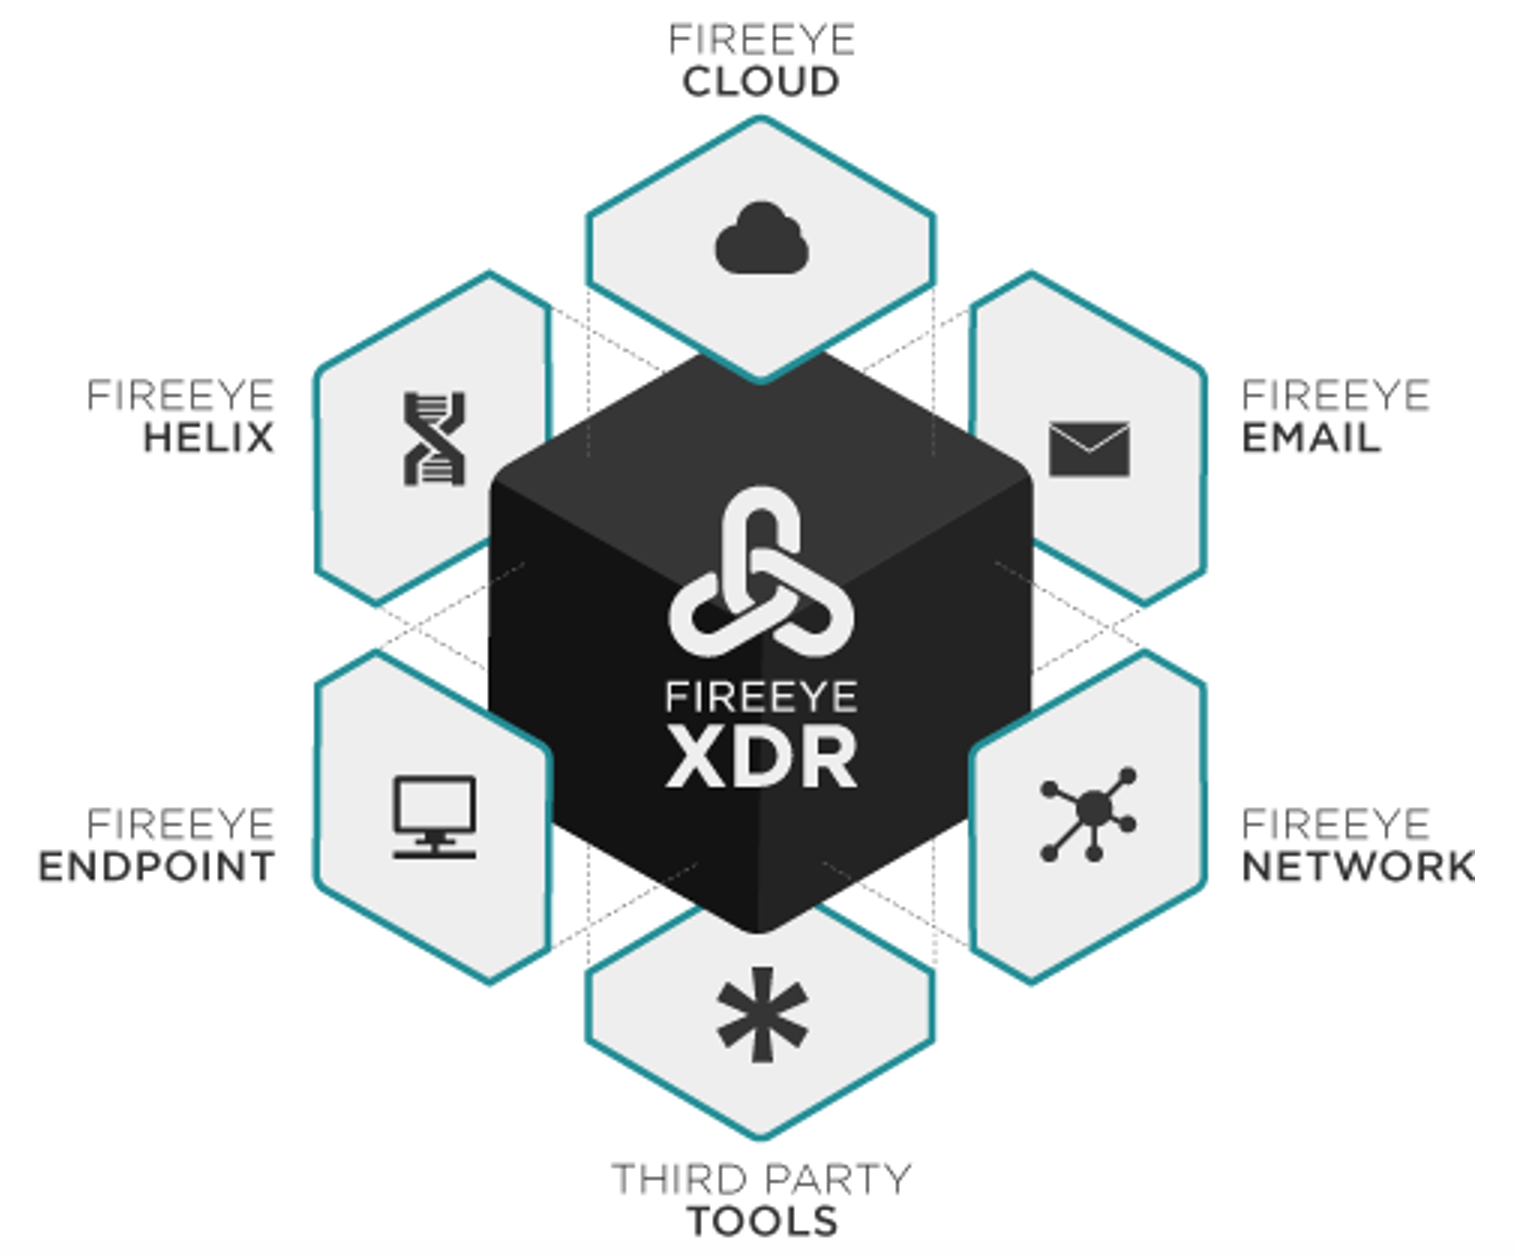 Introducing FireEye Extended Detection and Response (XDR): A Flexible XDR Solution Born From the Front Lines of Threat Detection and Response